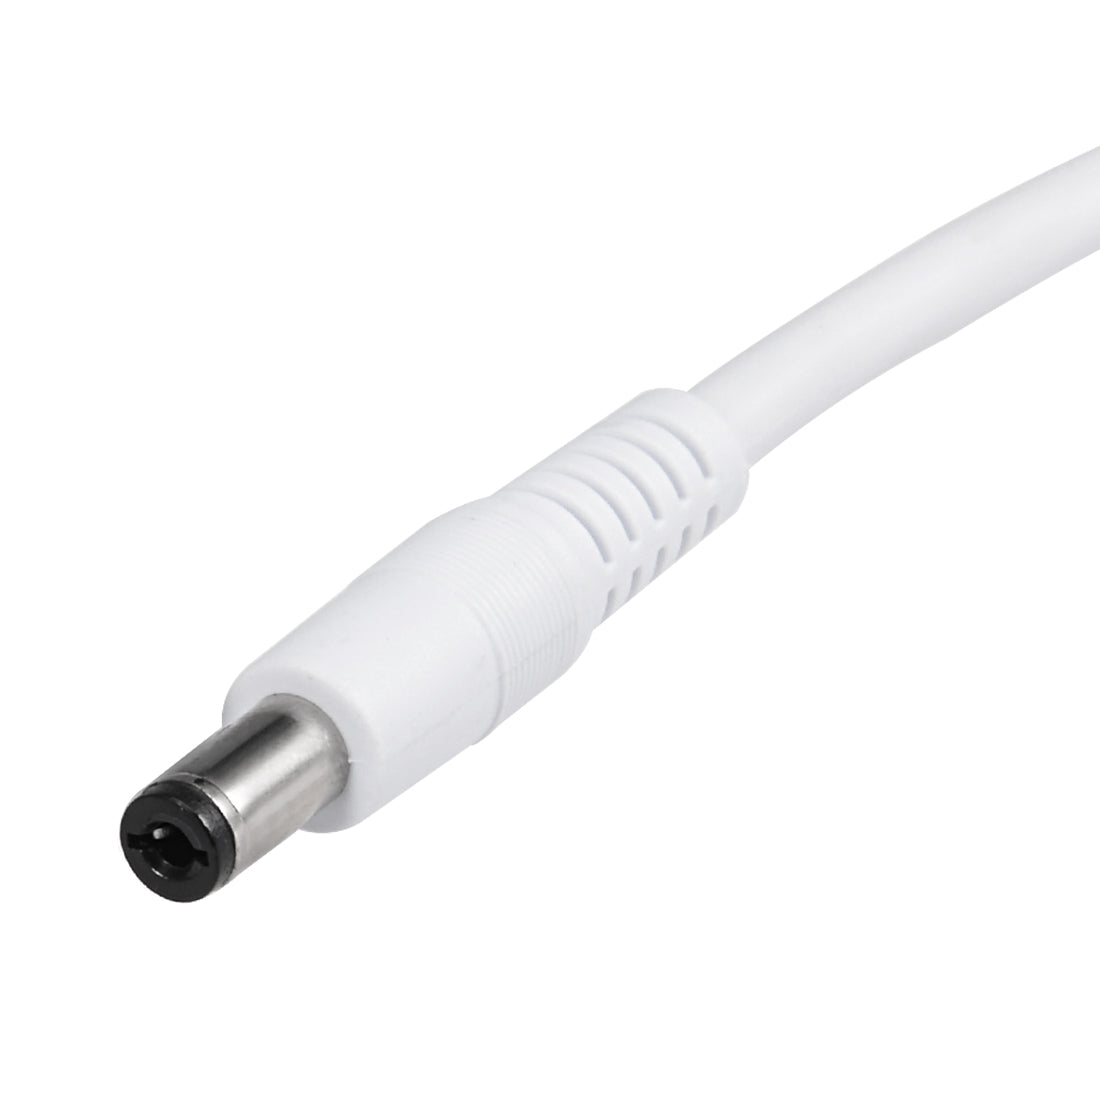 uxcell Uxcell 30cm White Male DC Power Pigtail Cable Connector 18AWG 10A for CCTV Security Camera 2.1 x 5.5mm